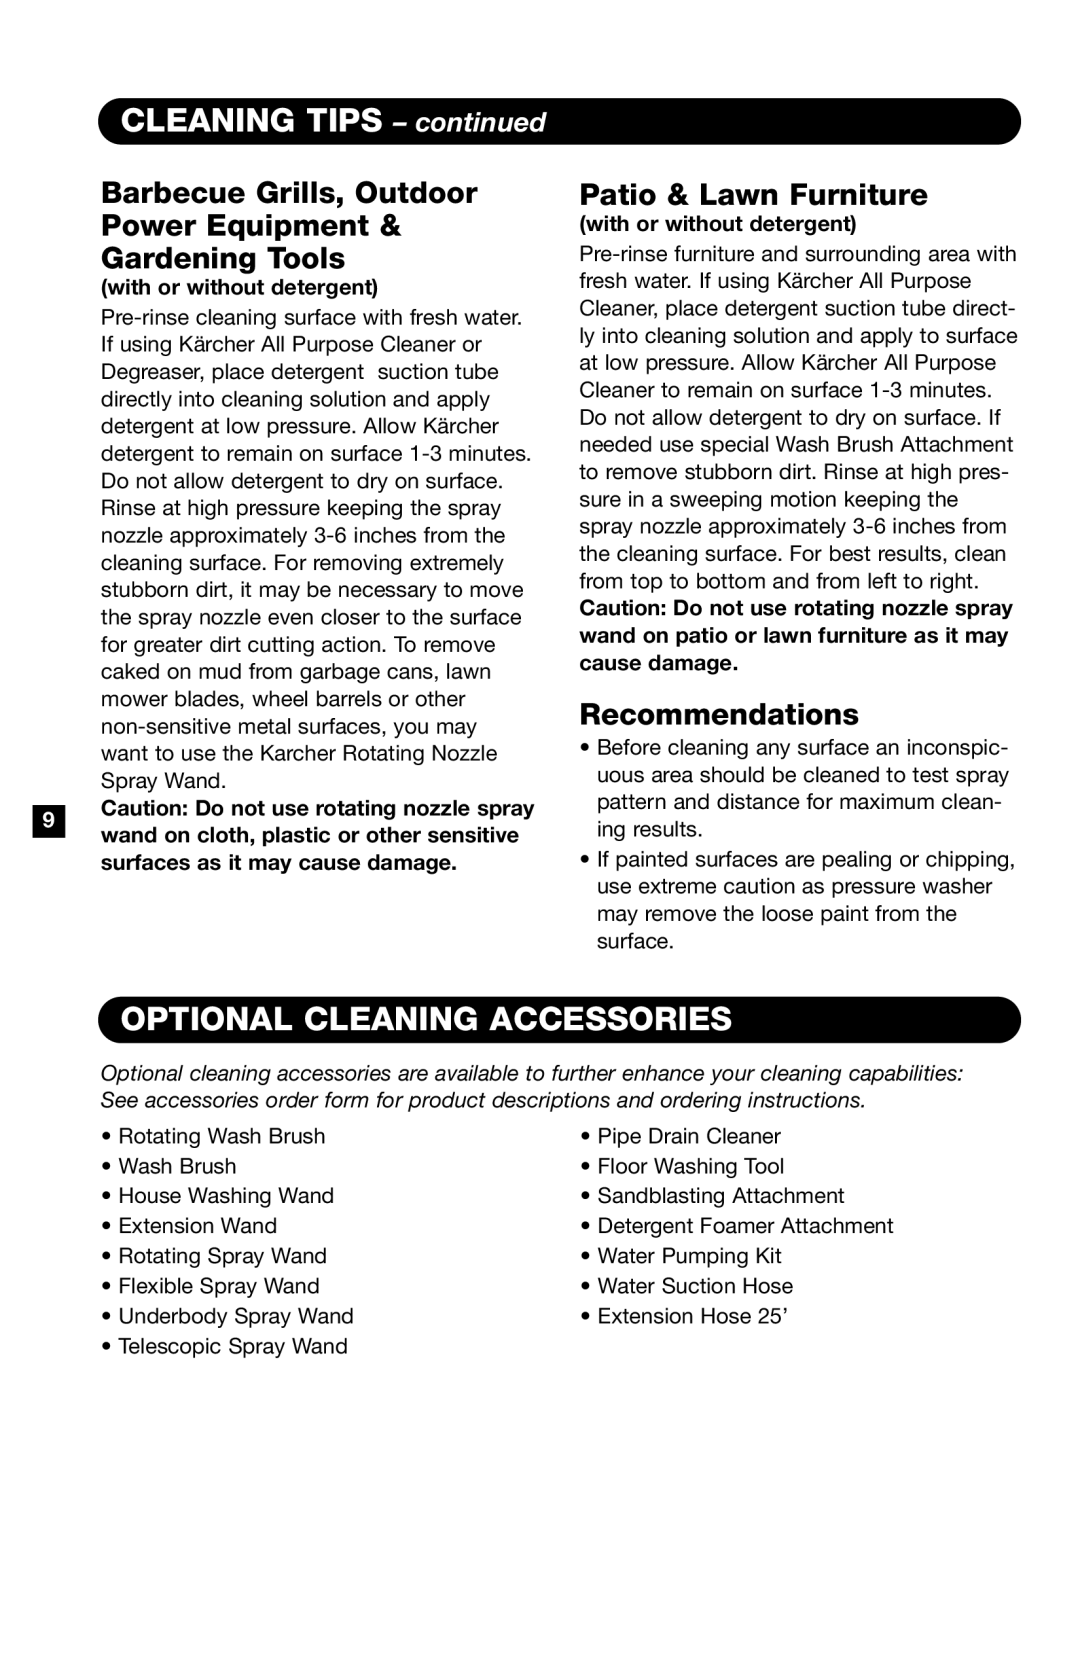 Karcher K330M CLEANING TIPS - continued, Optional Cleaning Accessories, Barbecue Grills, Outdoor Power Equipment 